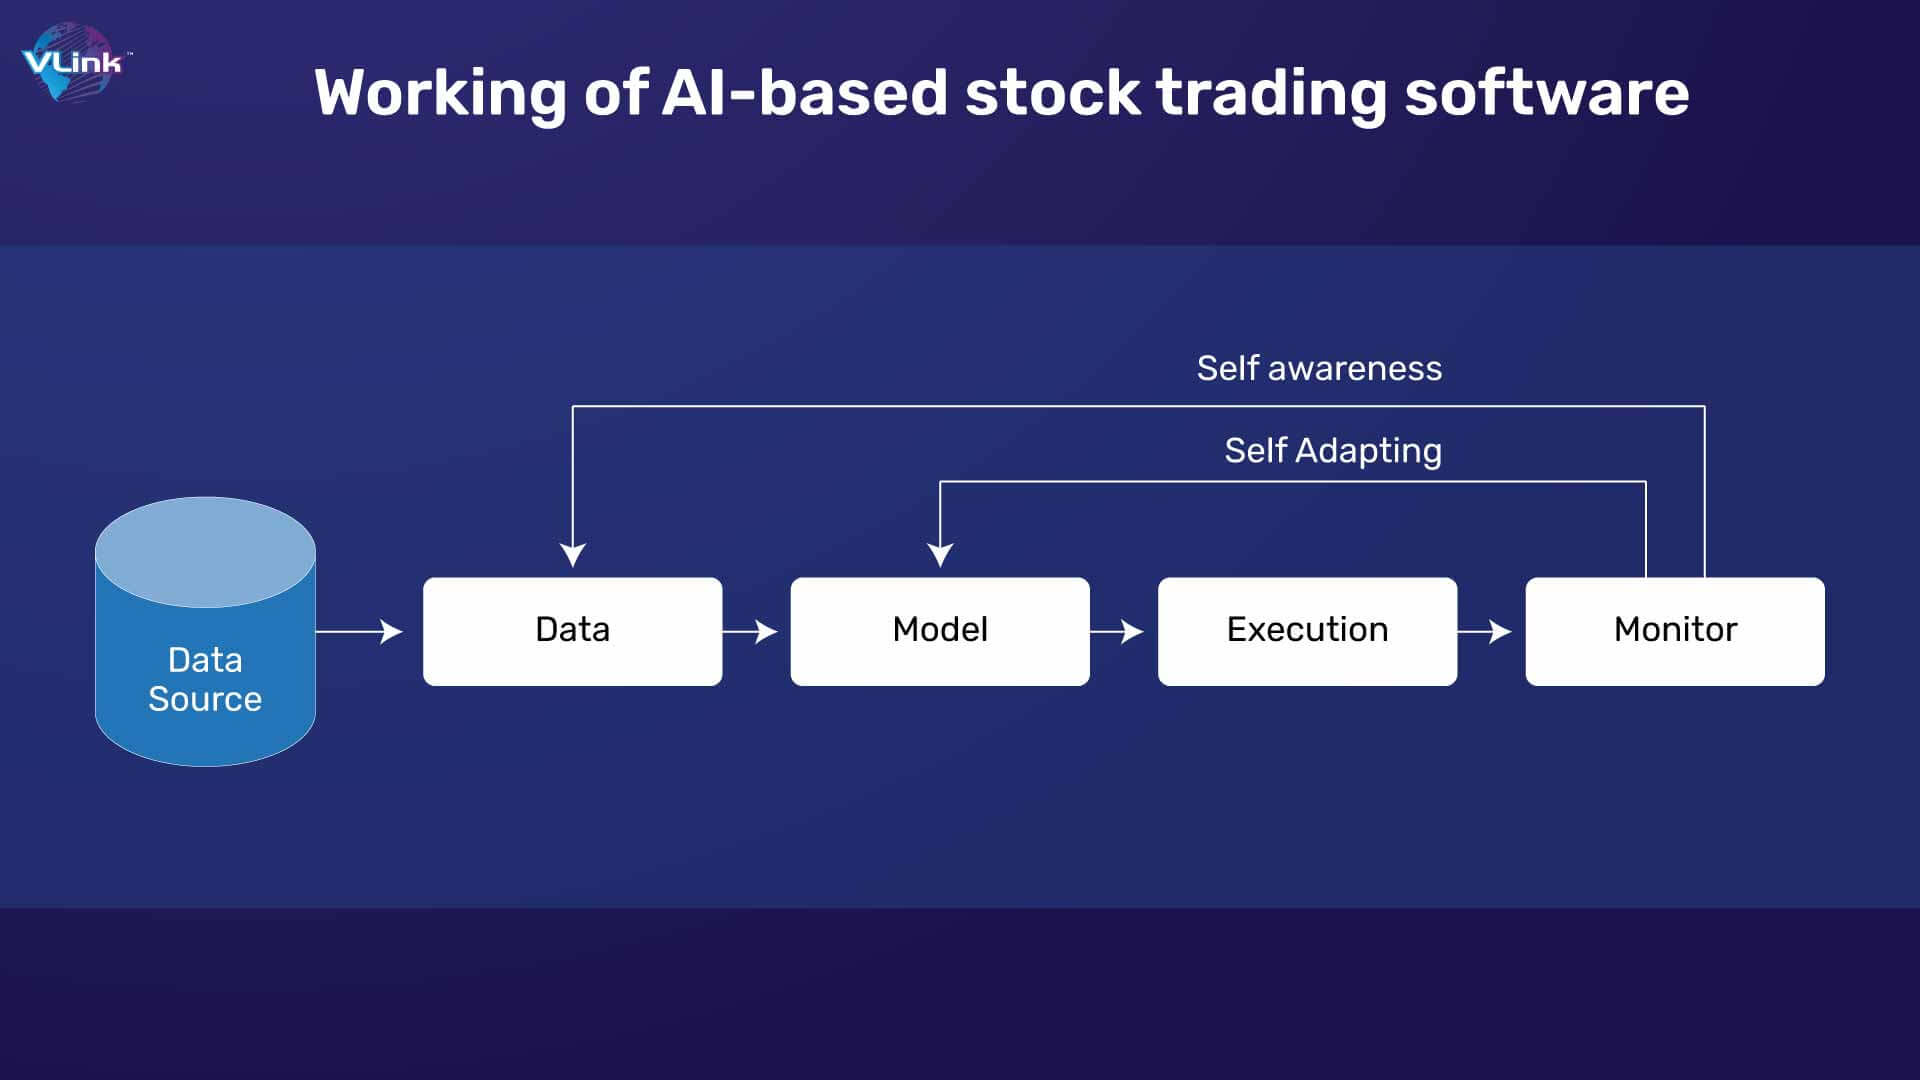 Working of AI-based stock trading software